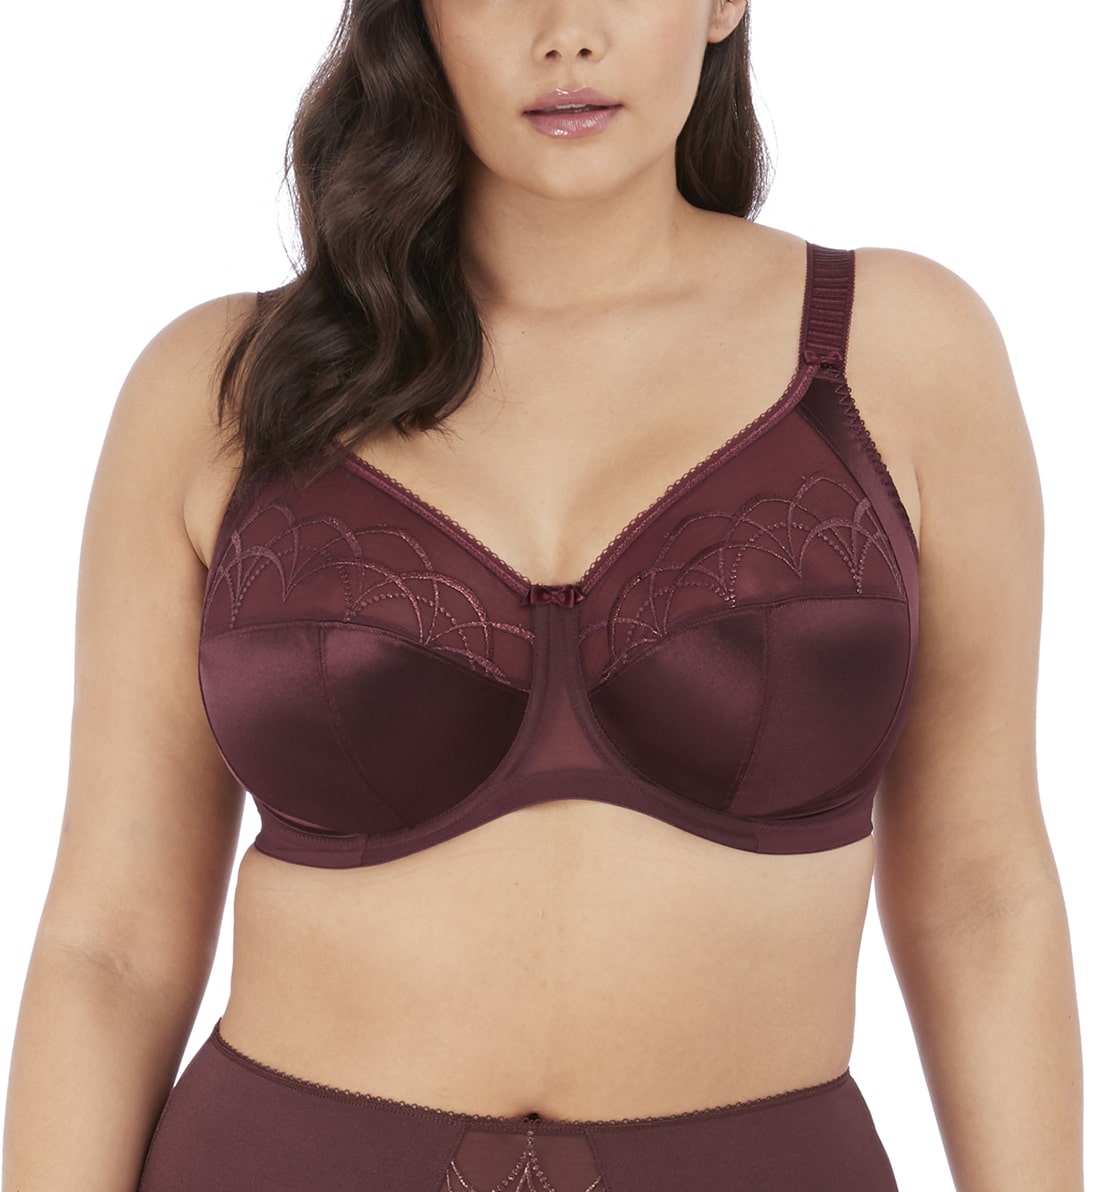 Elomi Cate Embroidered Full Cup Banded Underwire Bra (4030)- Raisin